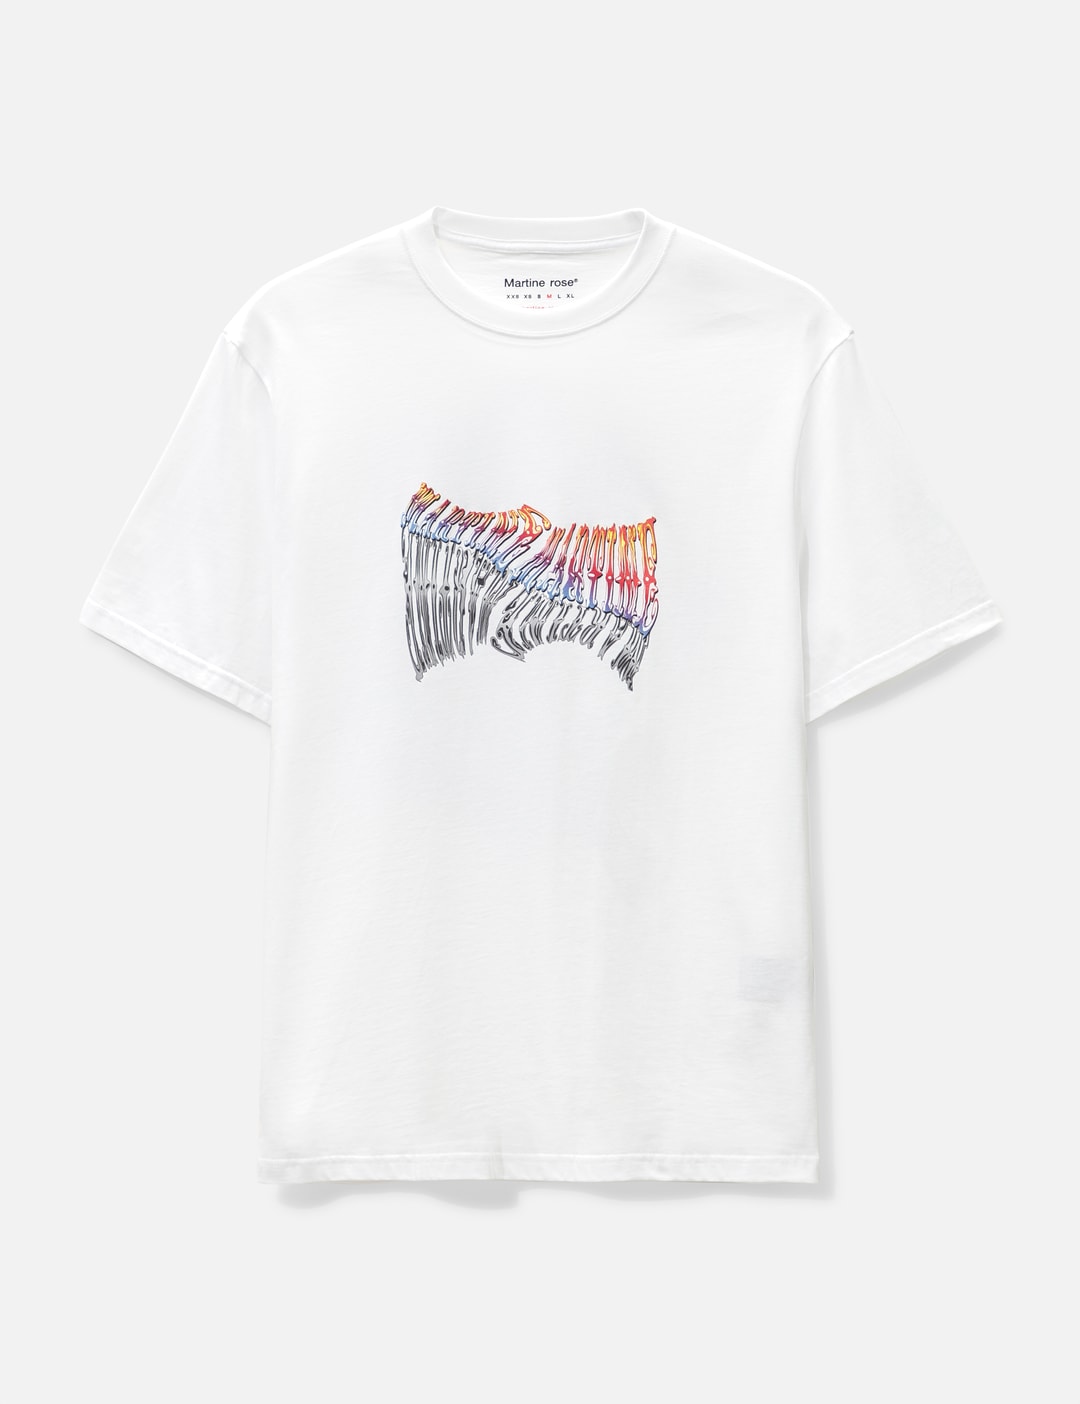 Martine Rose - Classic T-shirt  HBX - Globally Curated Fashion and  Lifestyle by Hypebeast